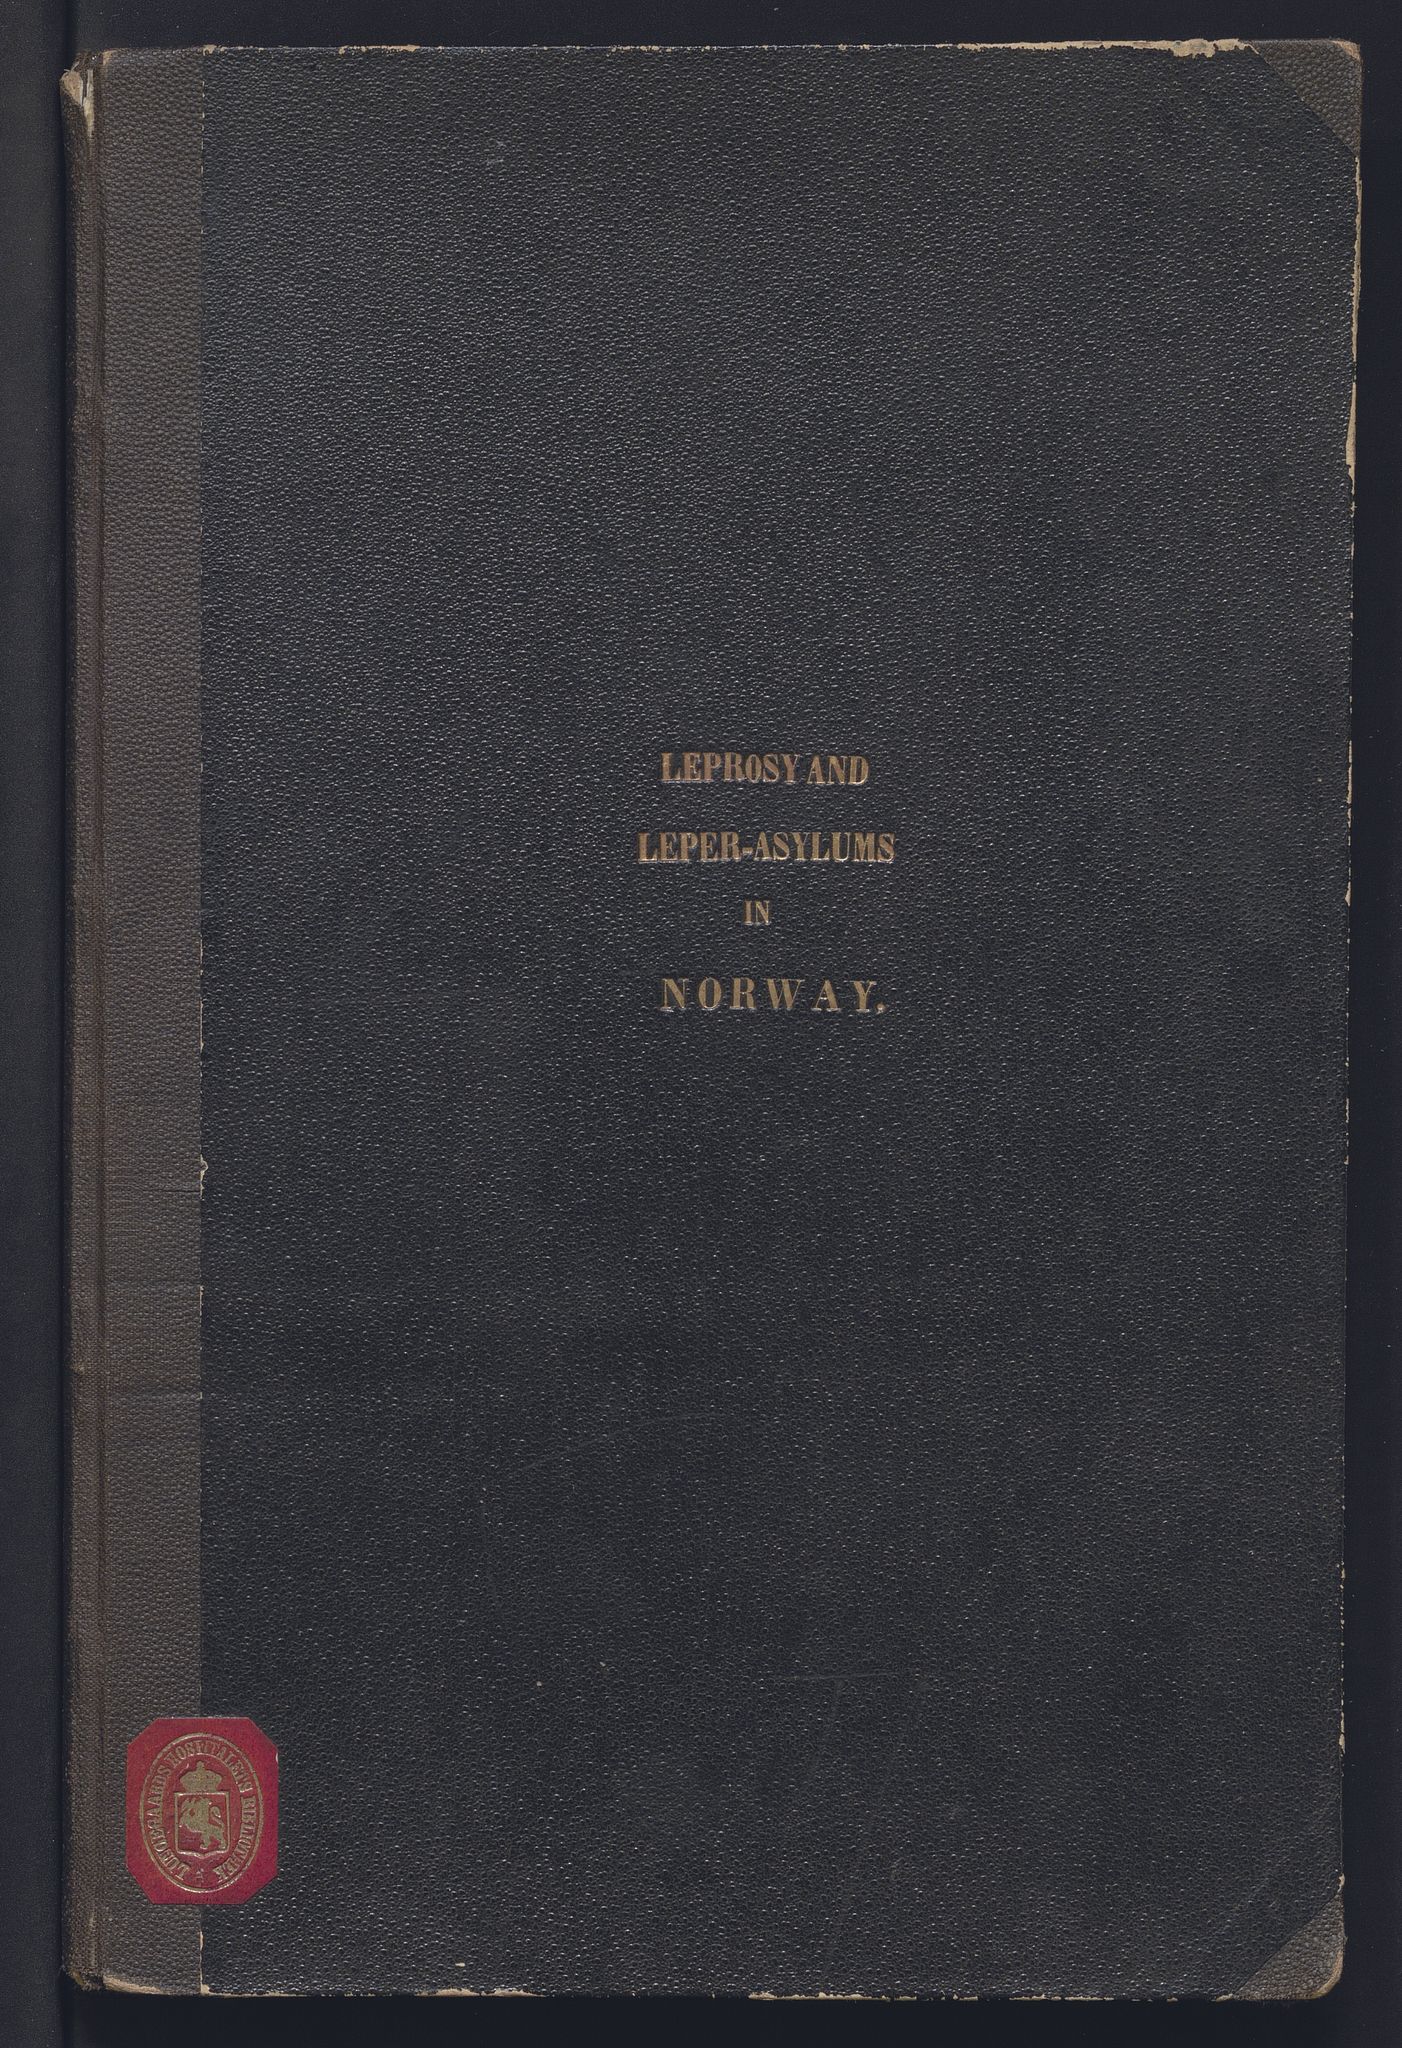 Andre publikasjoner, PUBL/PUBL-999/0004/0001: Henry Vandyke Carter: Report on Leprosy and Leper-asylums in Norway; with references to India (1874), 1874